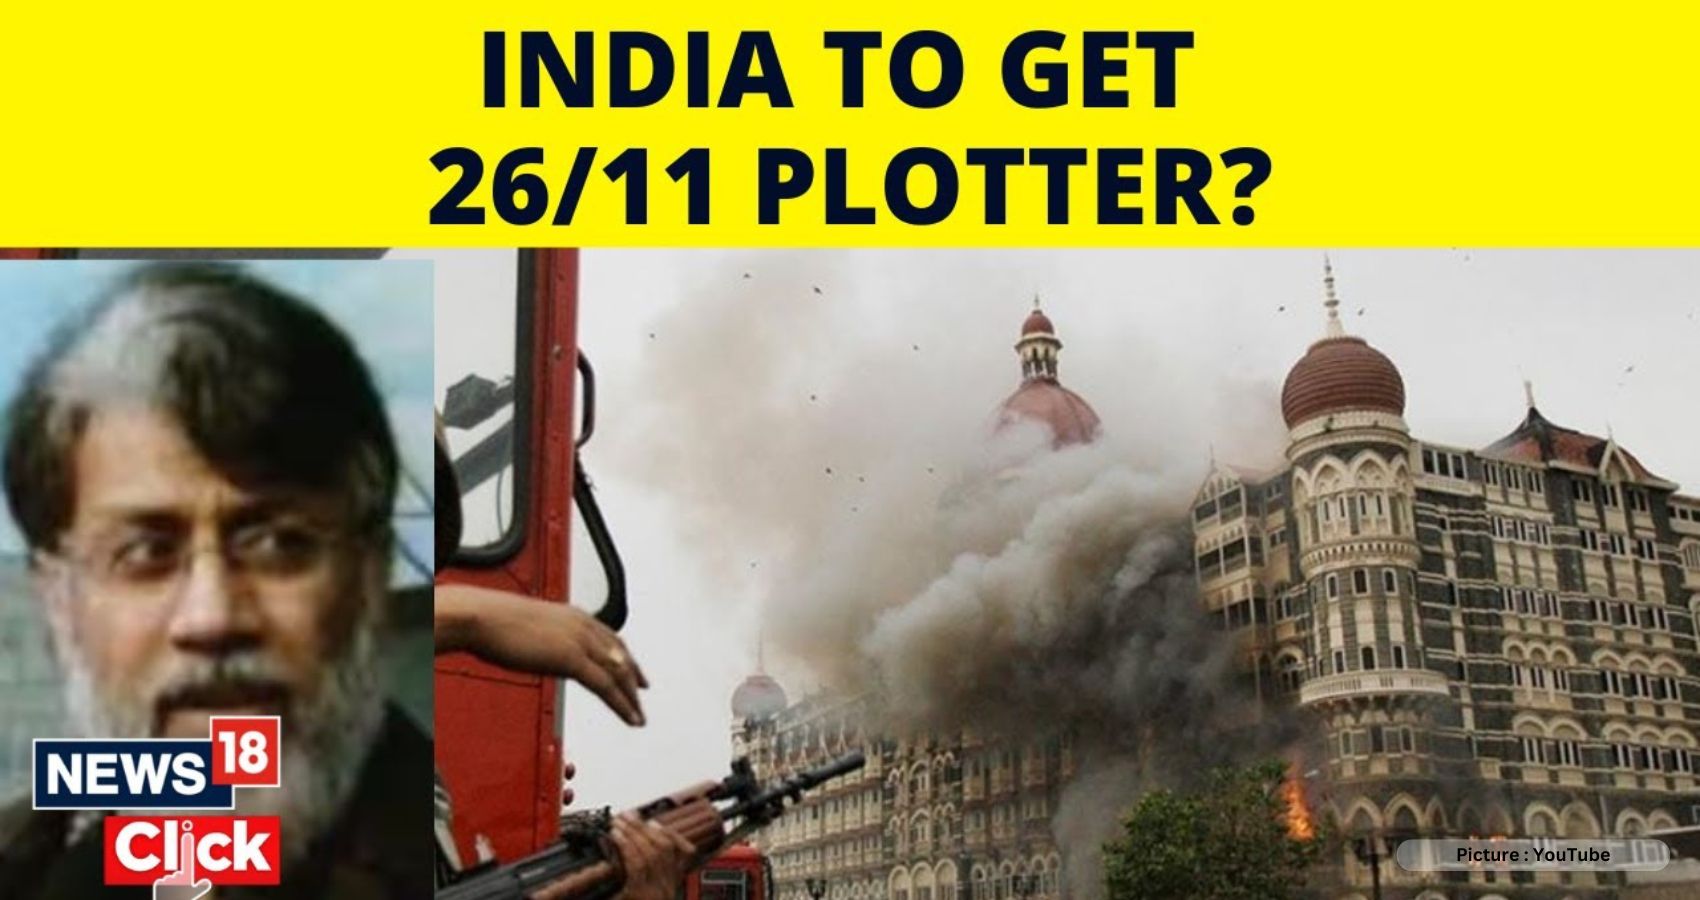 US Court Clears Extradition Of 26/11 Attack Accused To India